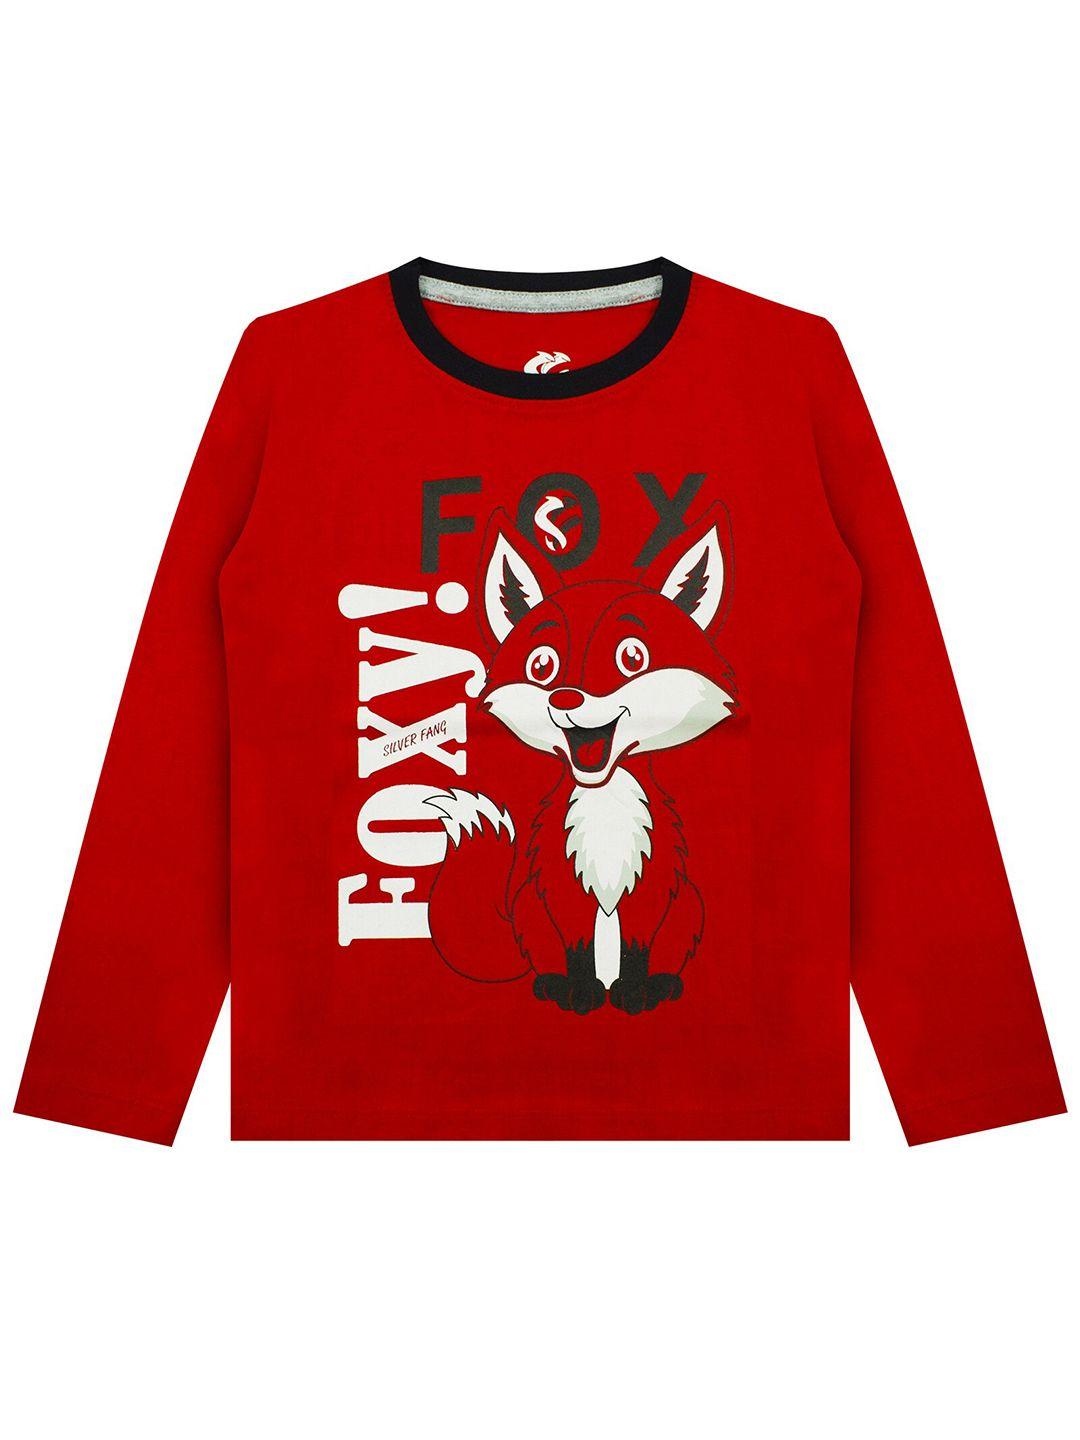 silver fang boys red printed cotton t-shirt